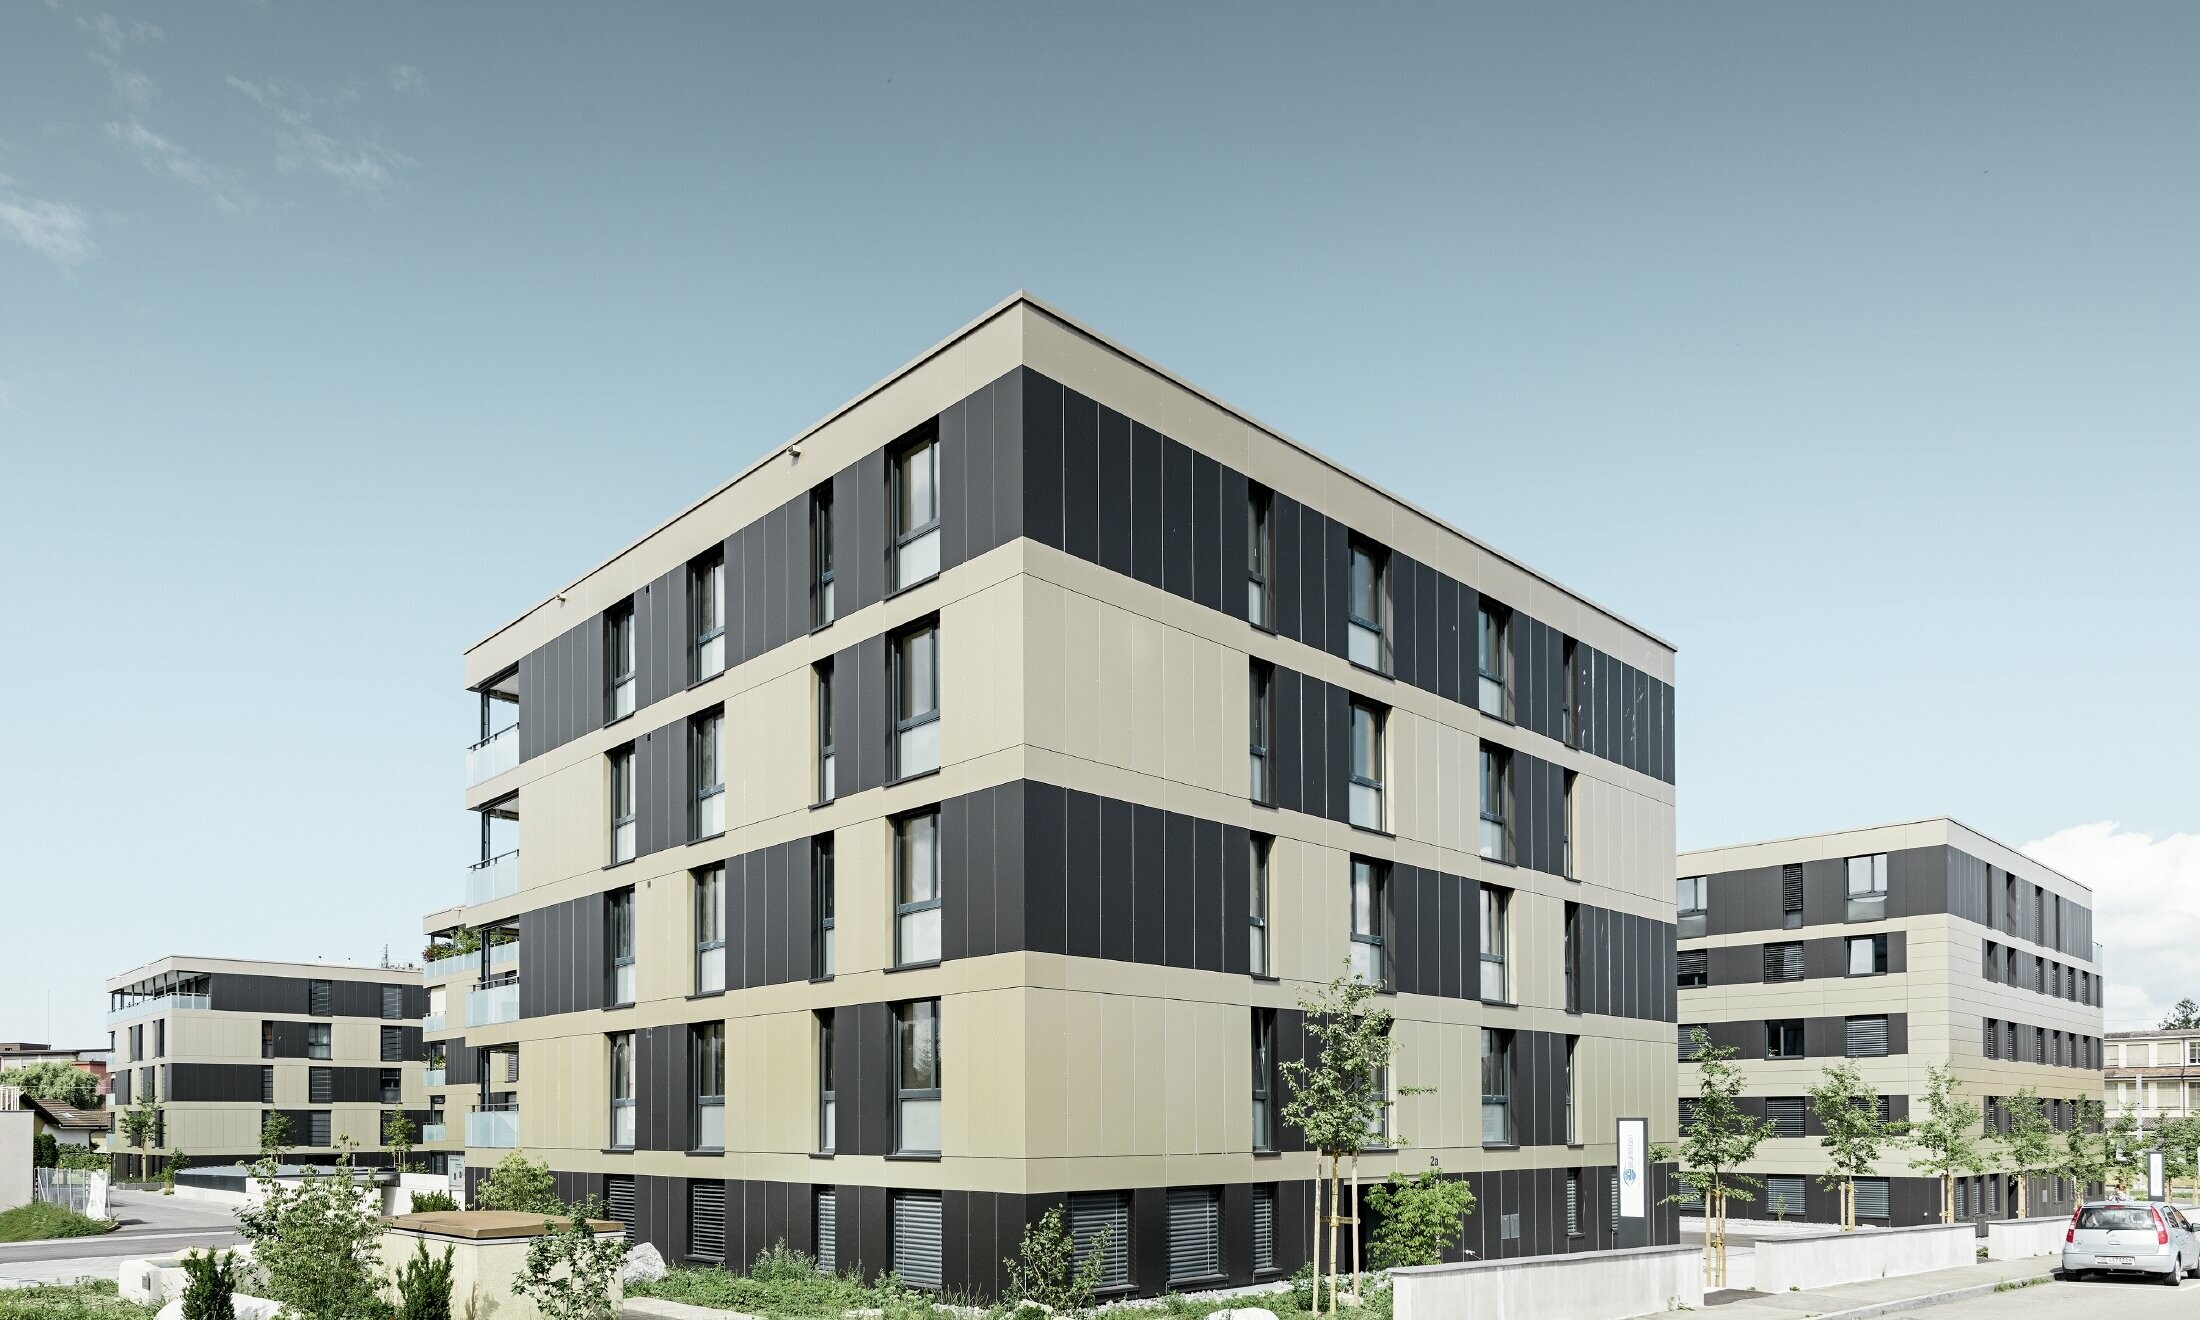 Cubic residential complex with an aluminium façade in bronze with black grey components